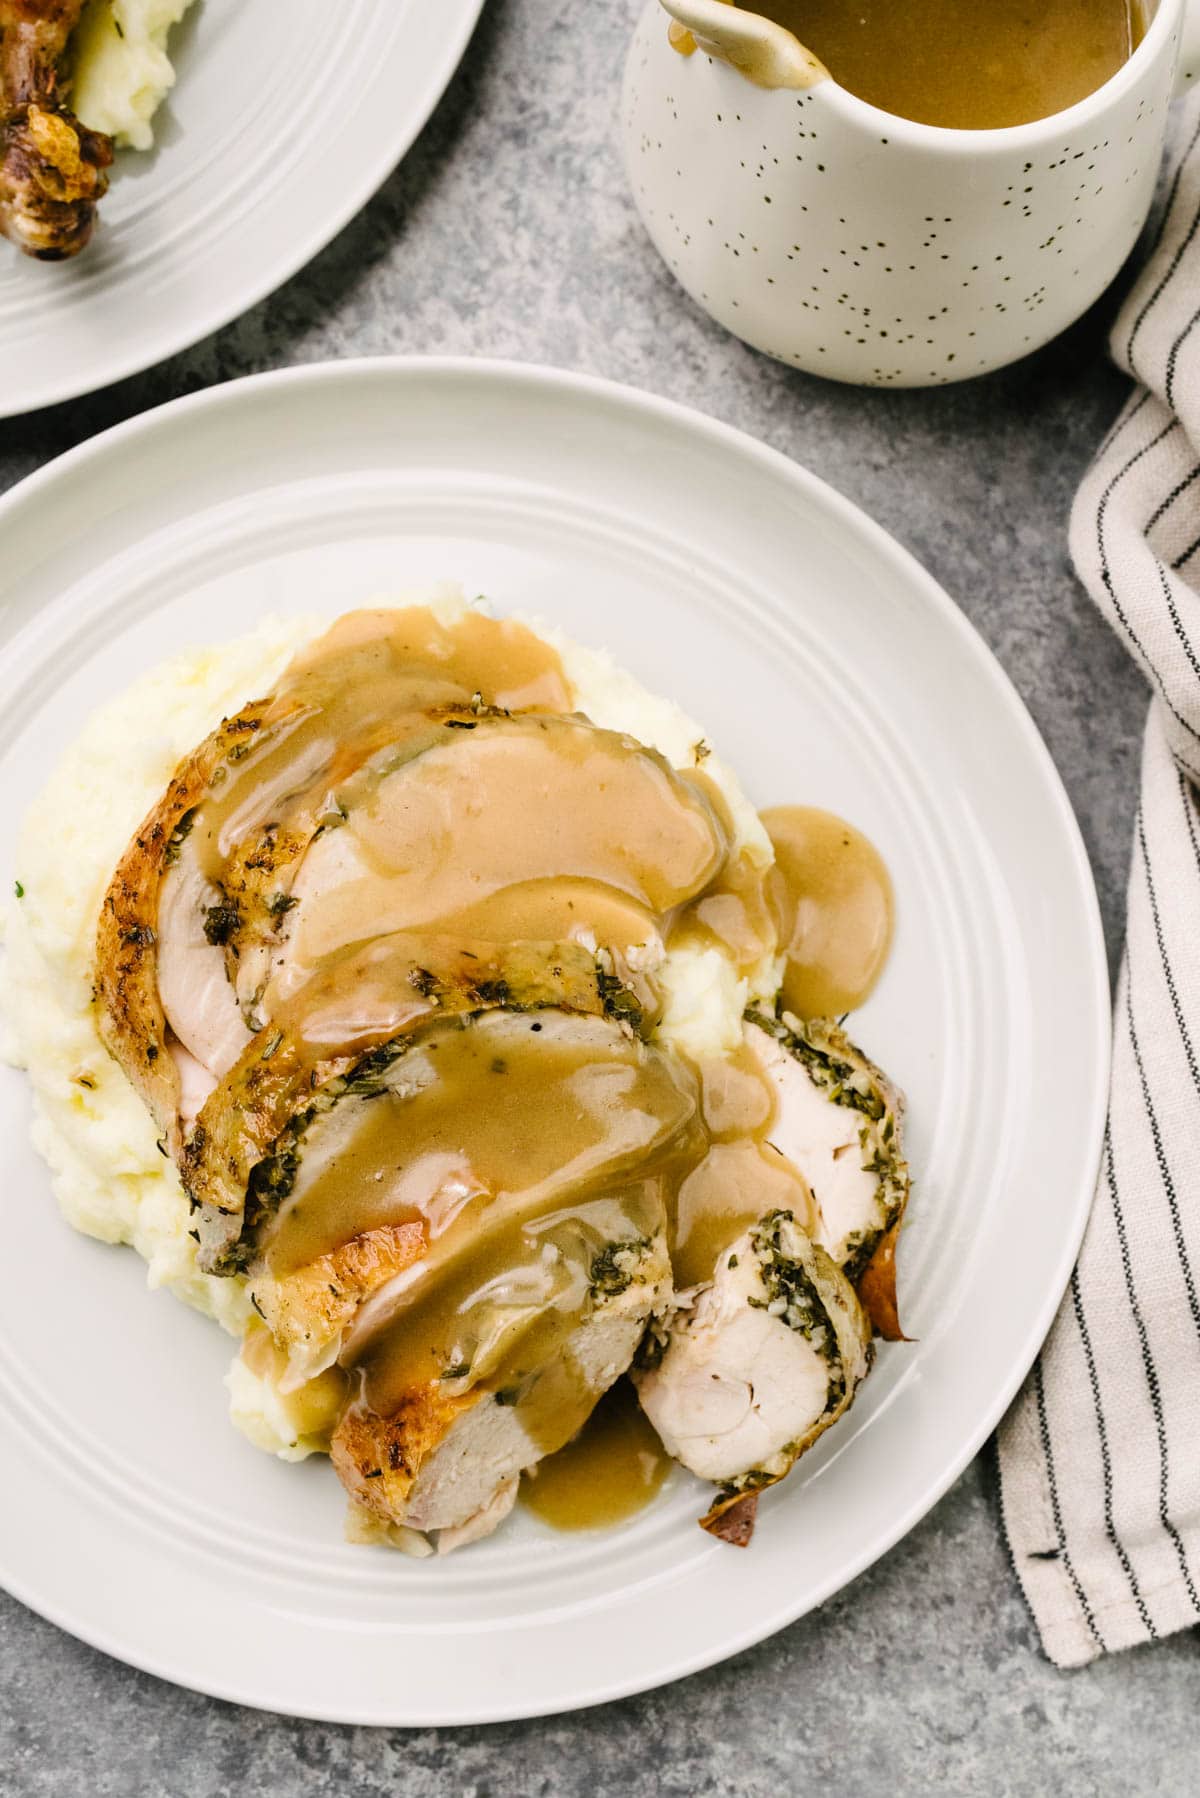 Herb roasted chicken breast slices over mashed potatoes, smothered with gravy; a striped linen napkin and small pitcher of gravy surround the plate.